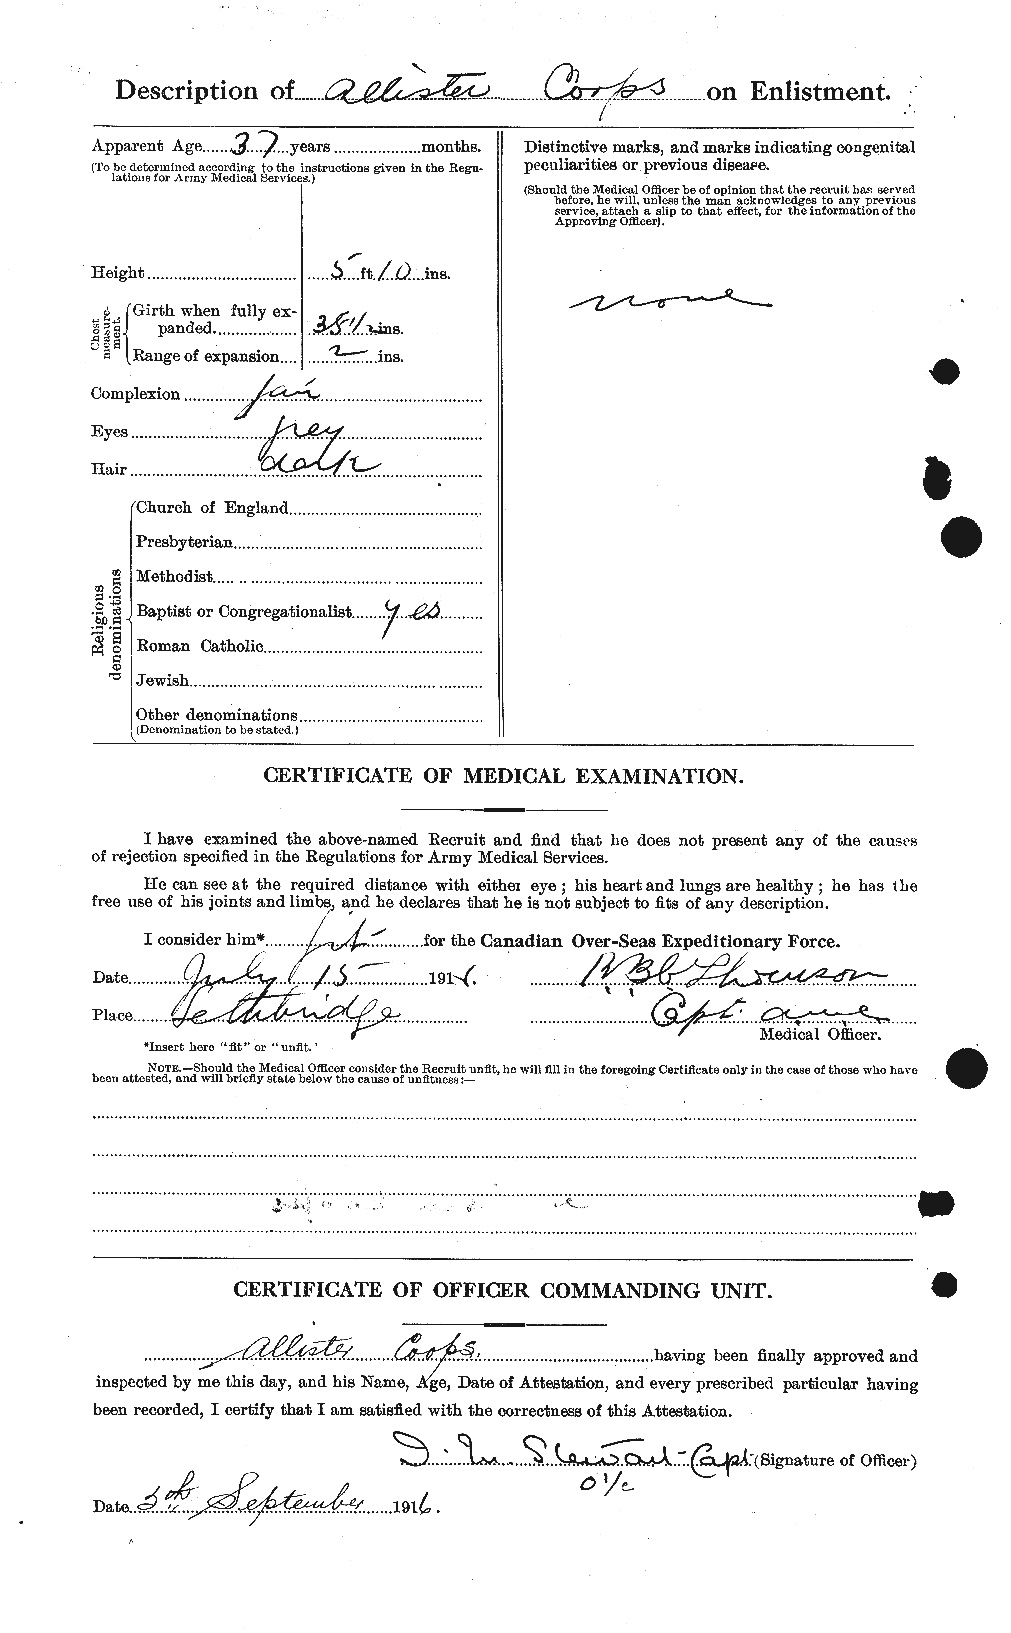 Personnel Records of the First World War - CEF 057684b